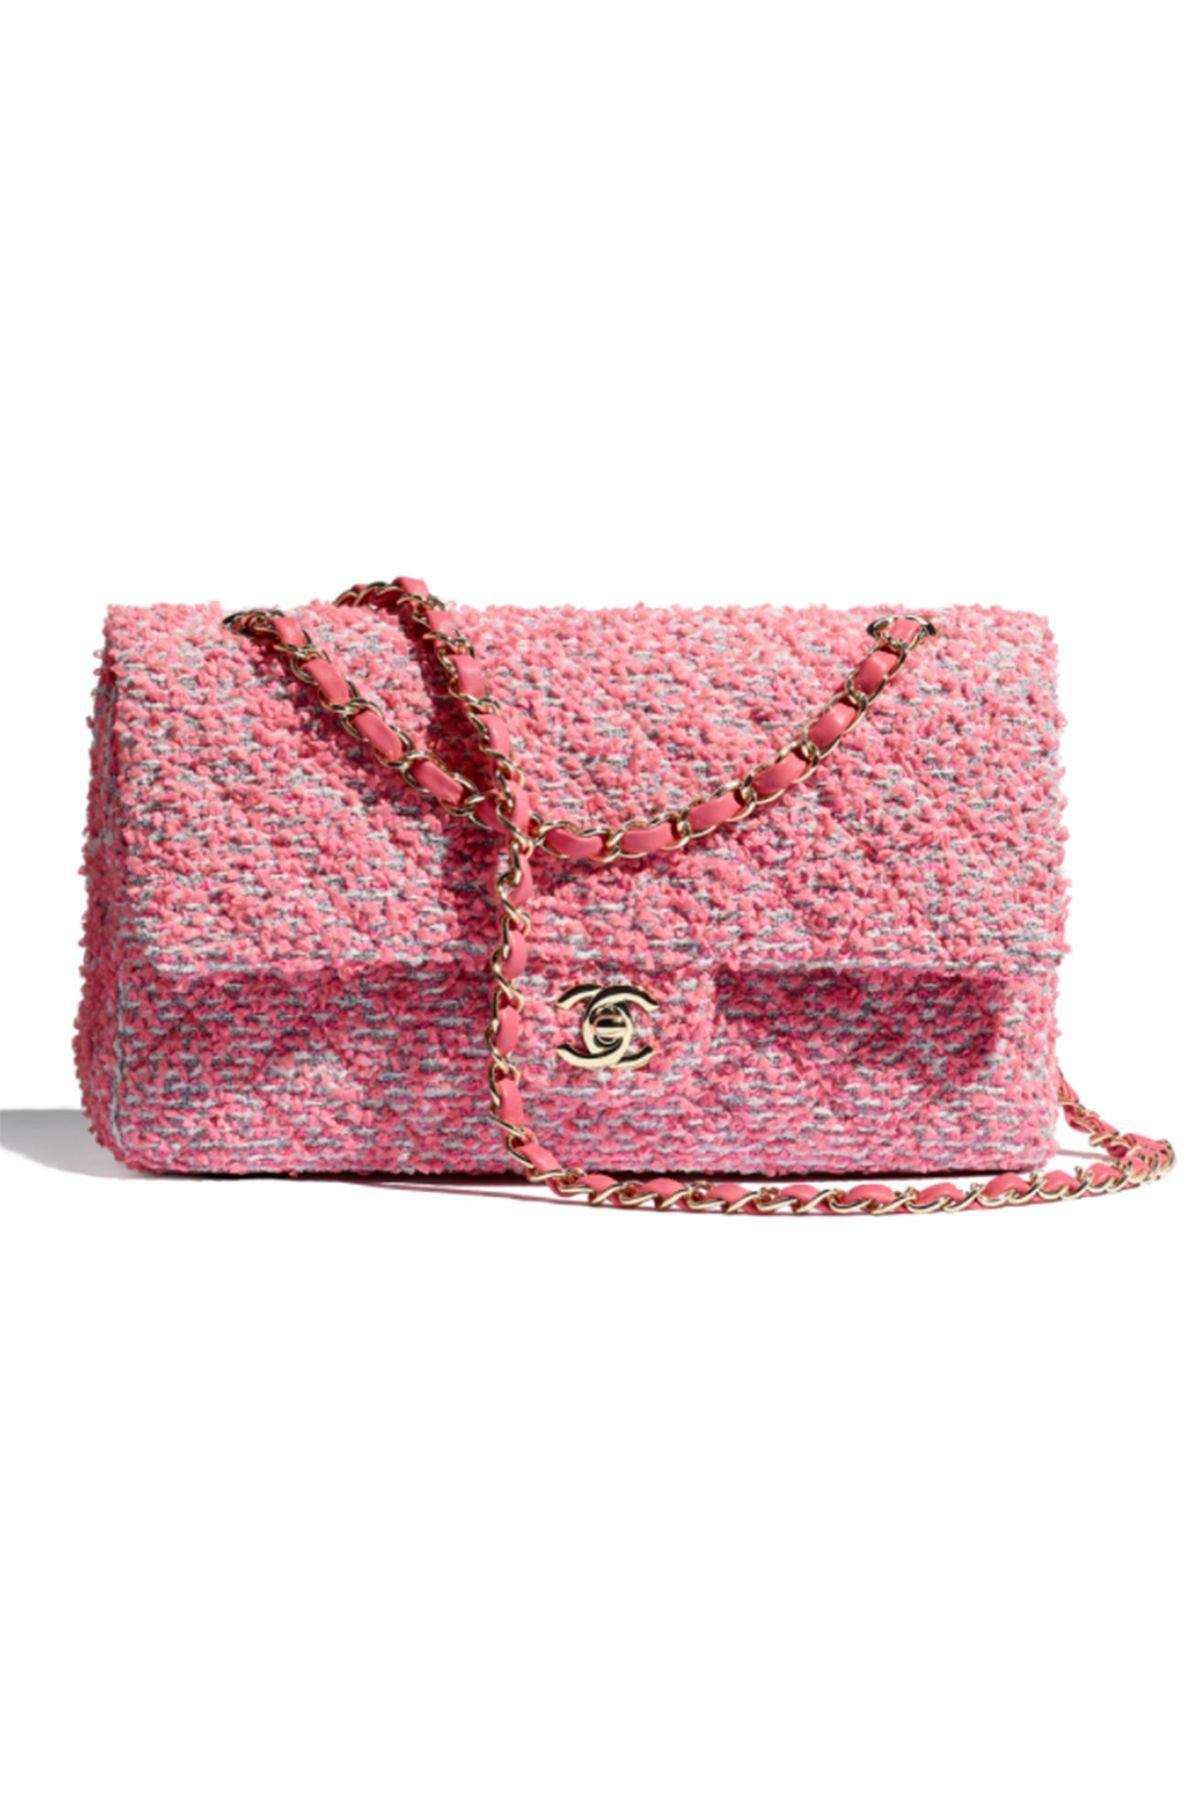 Chanel Tweed Flap Bag Pink Tweed with Gold Hardware New in Box WA001